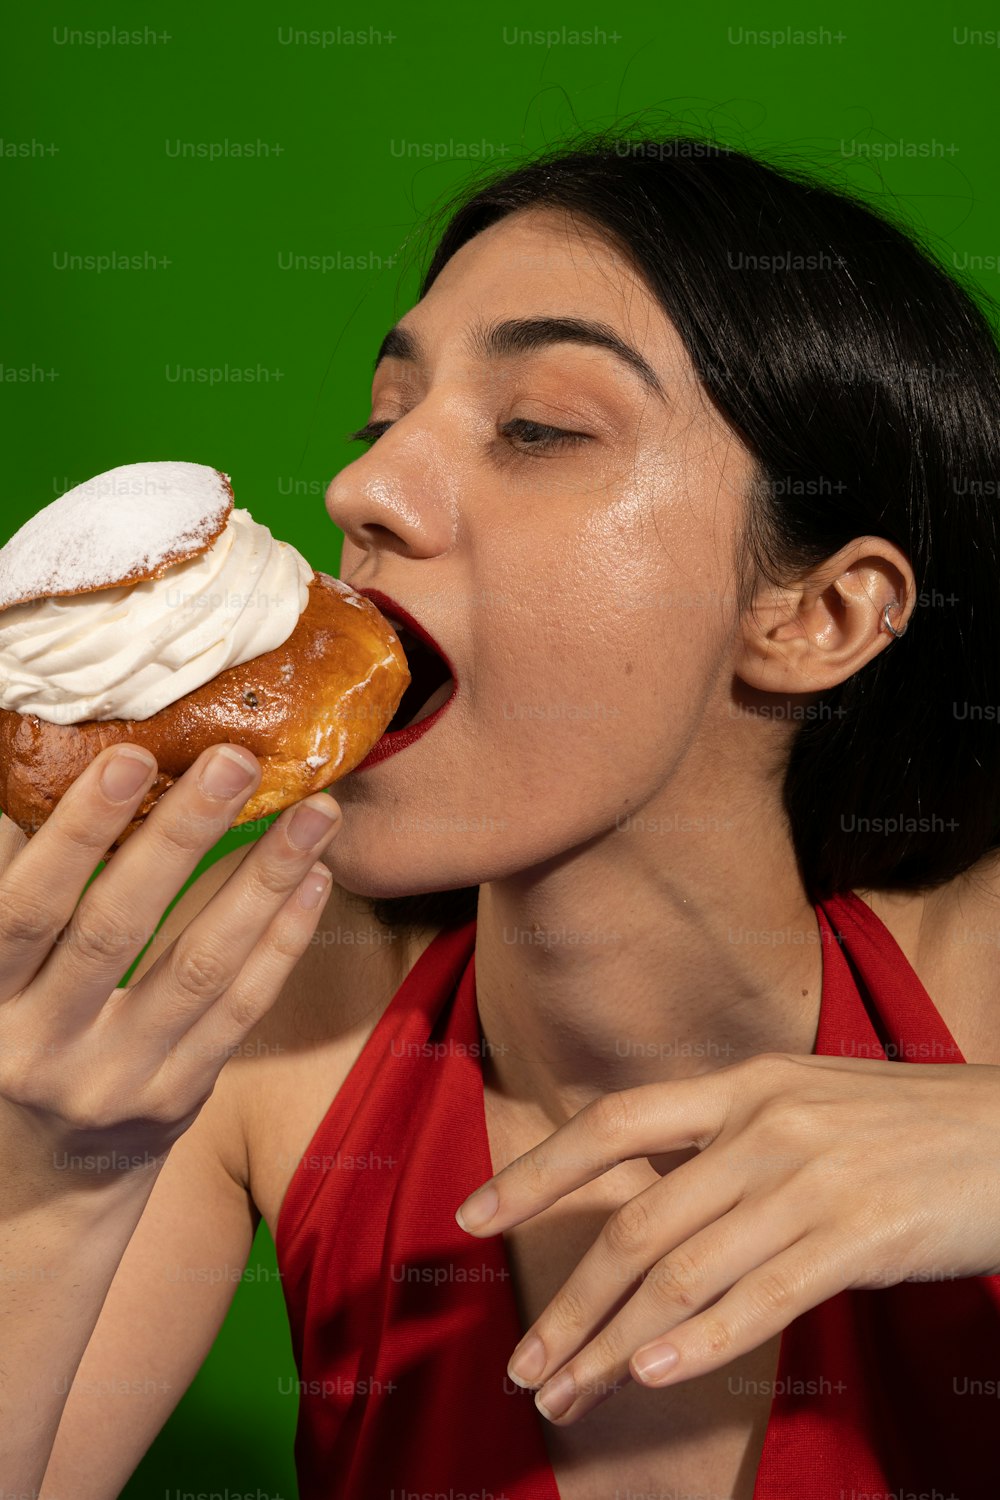 a woman in a red dress eating a donut